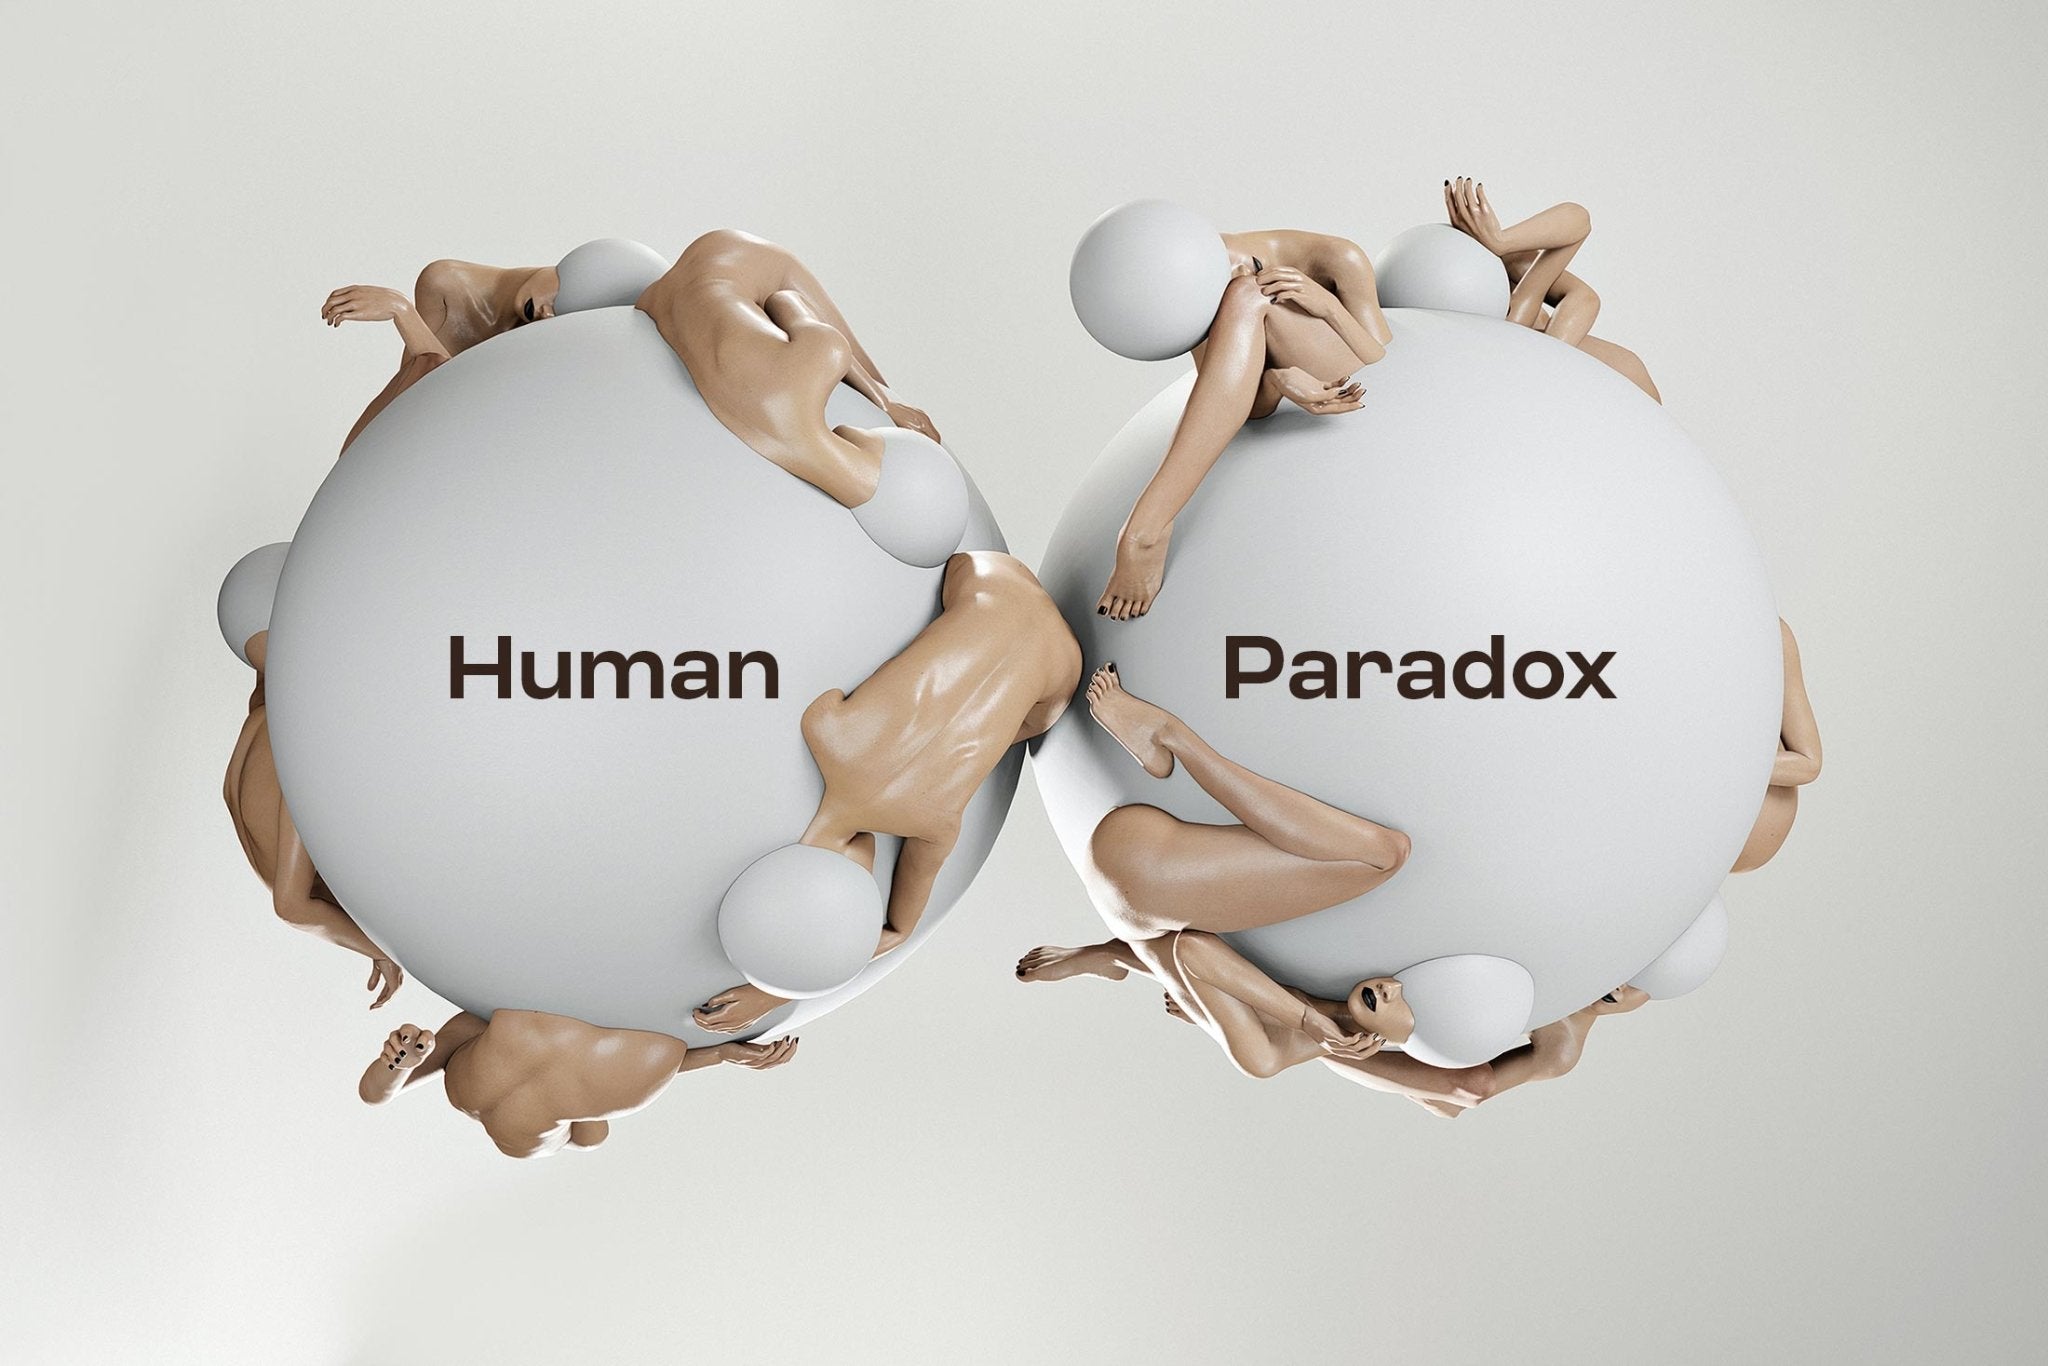 The Human Paradox - A Conscious State